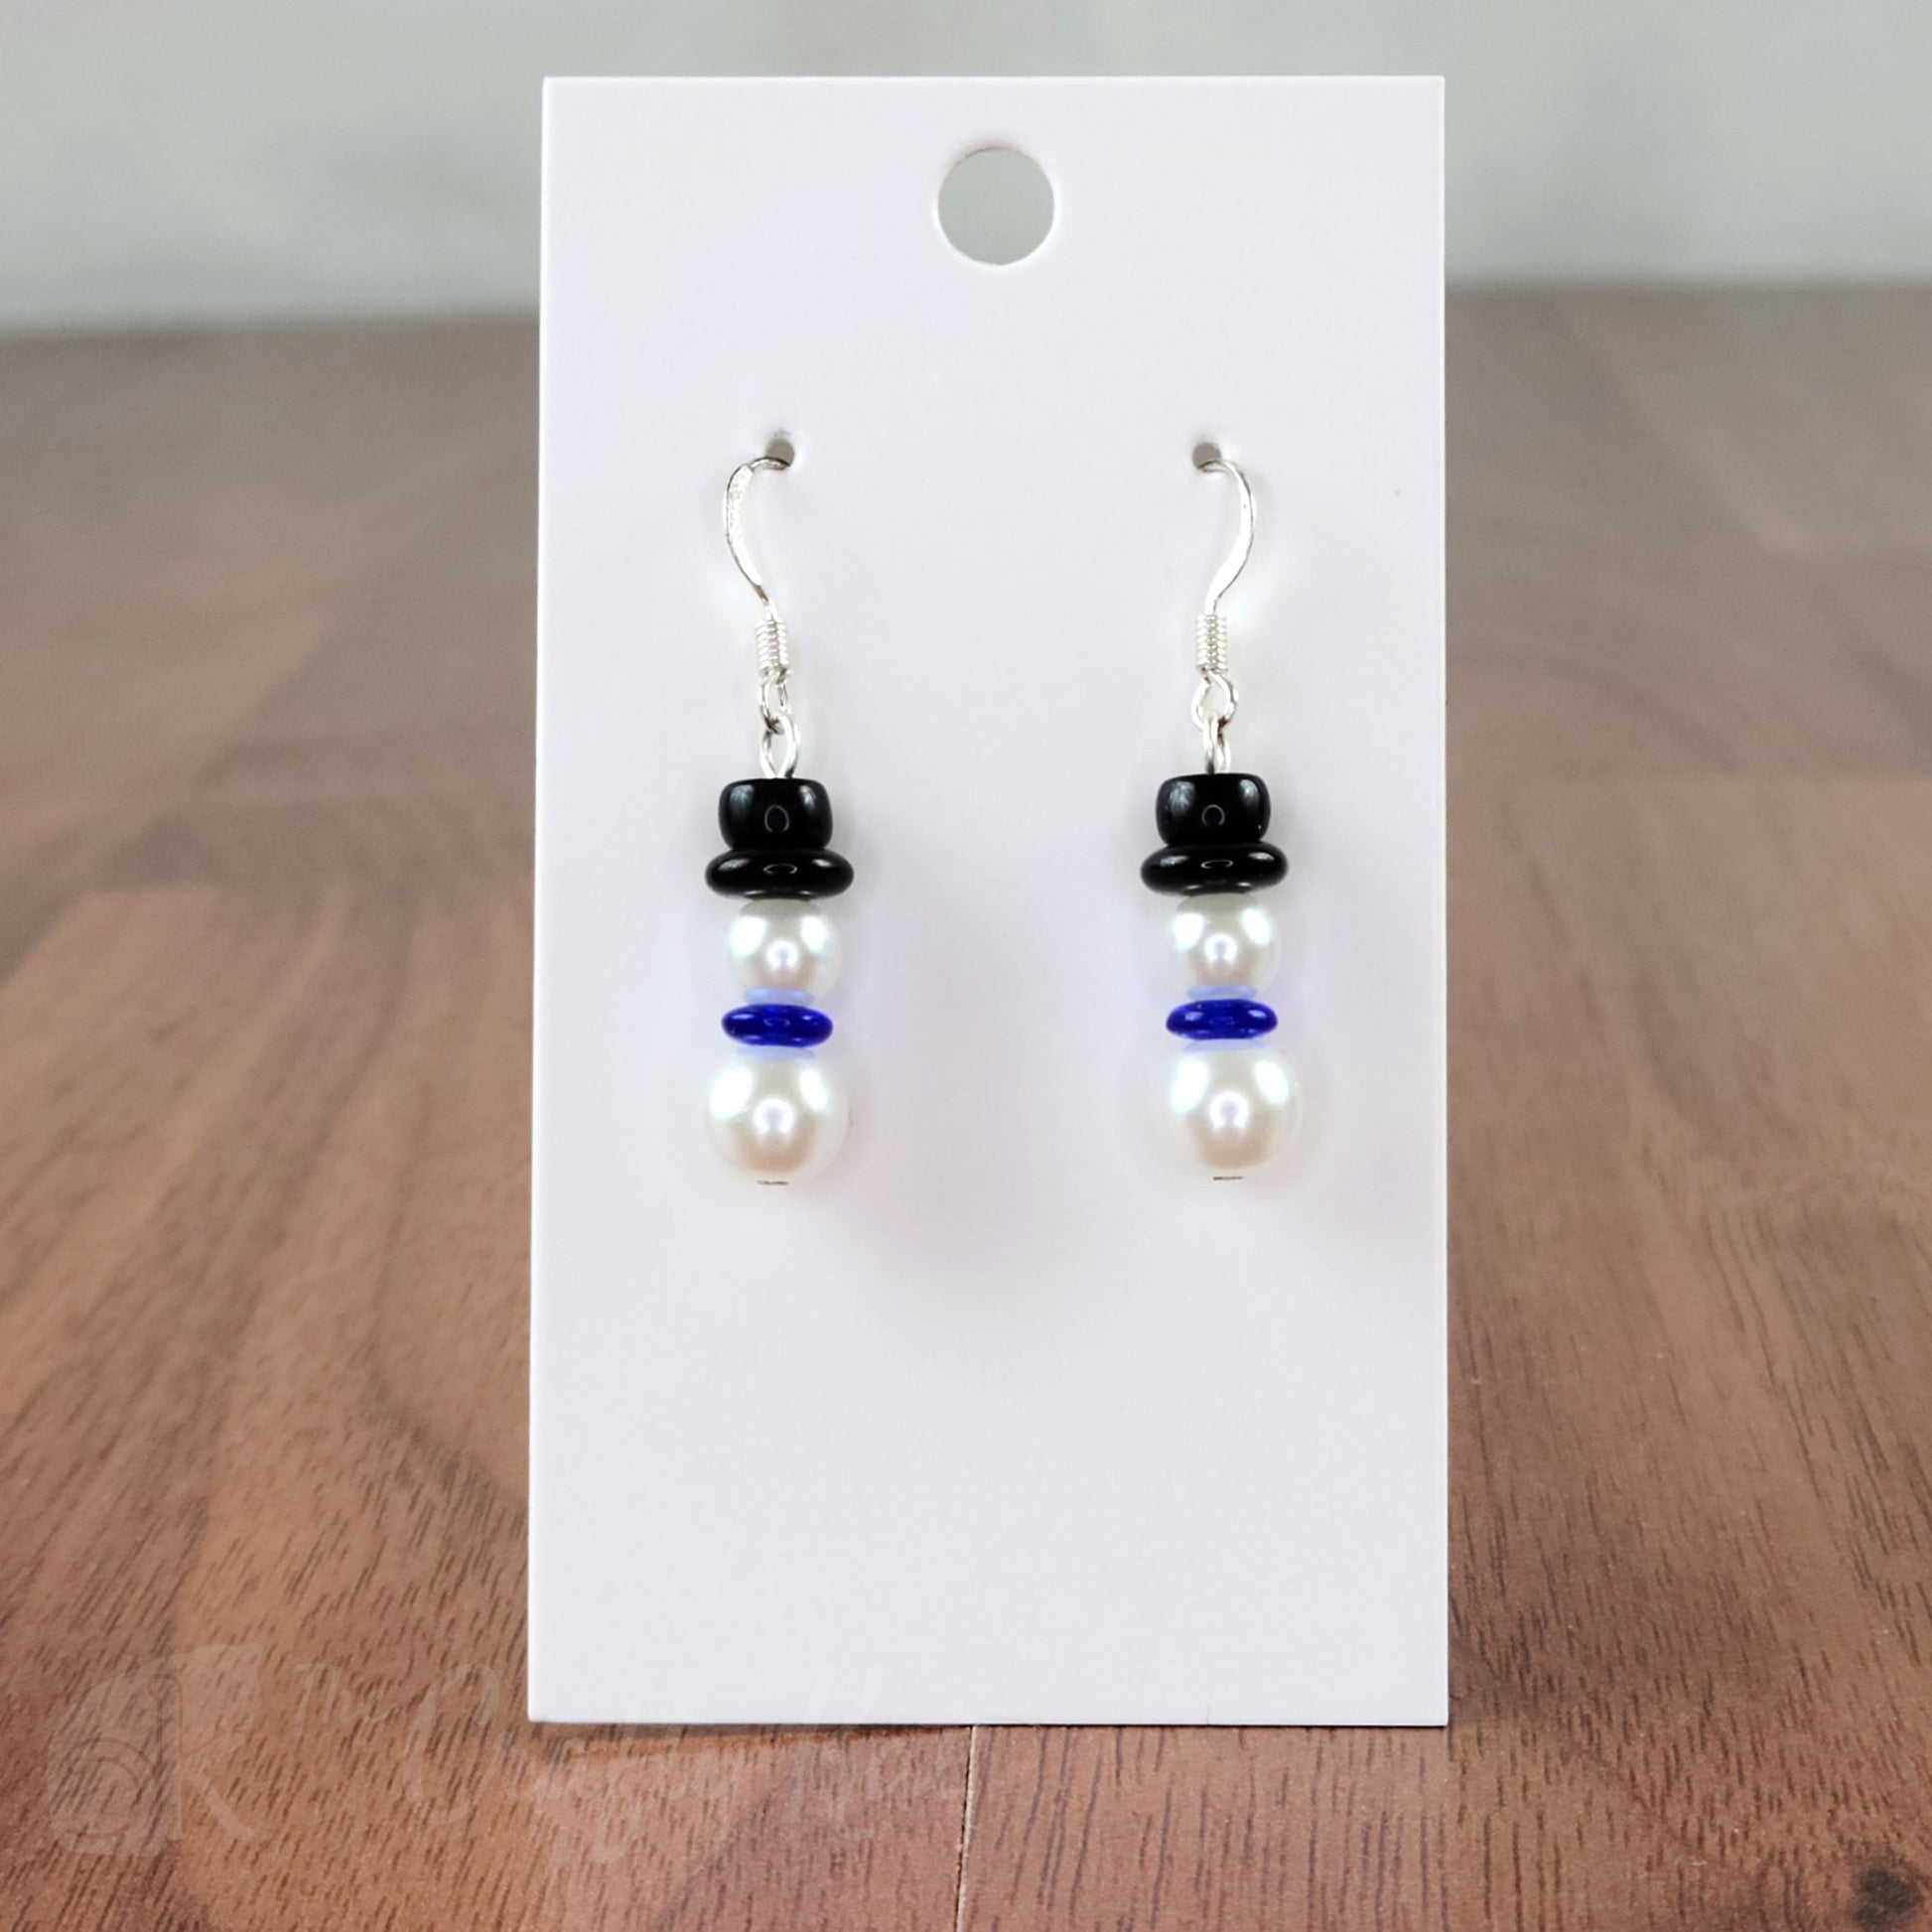 A pair of earring drops made of glass pearls and pressed glass beads, each drop forming the shape of a snowman with a blue scarf and black top hat.